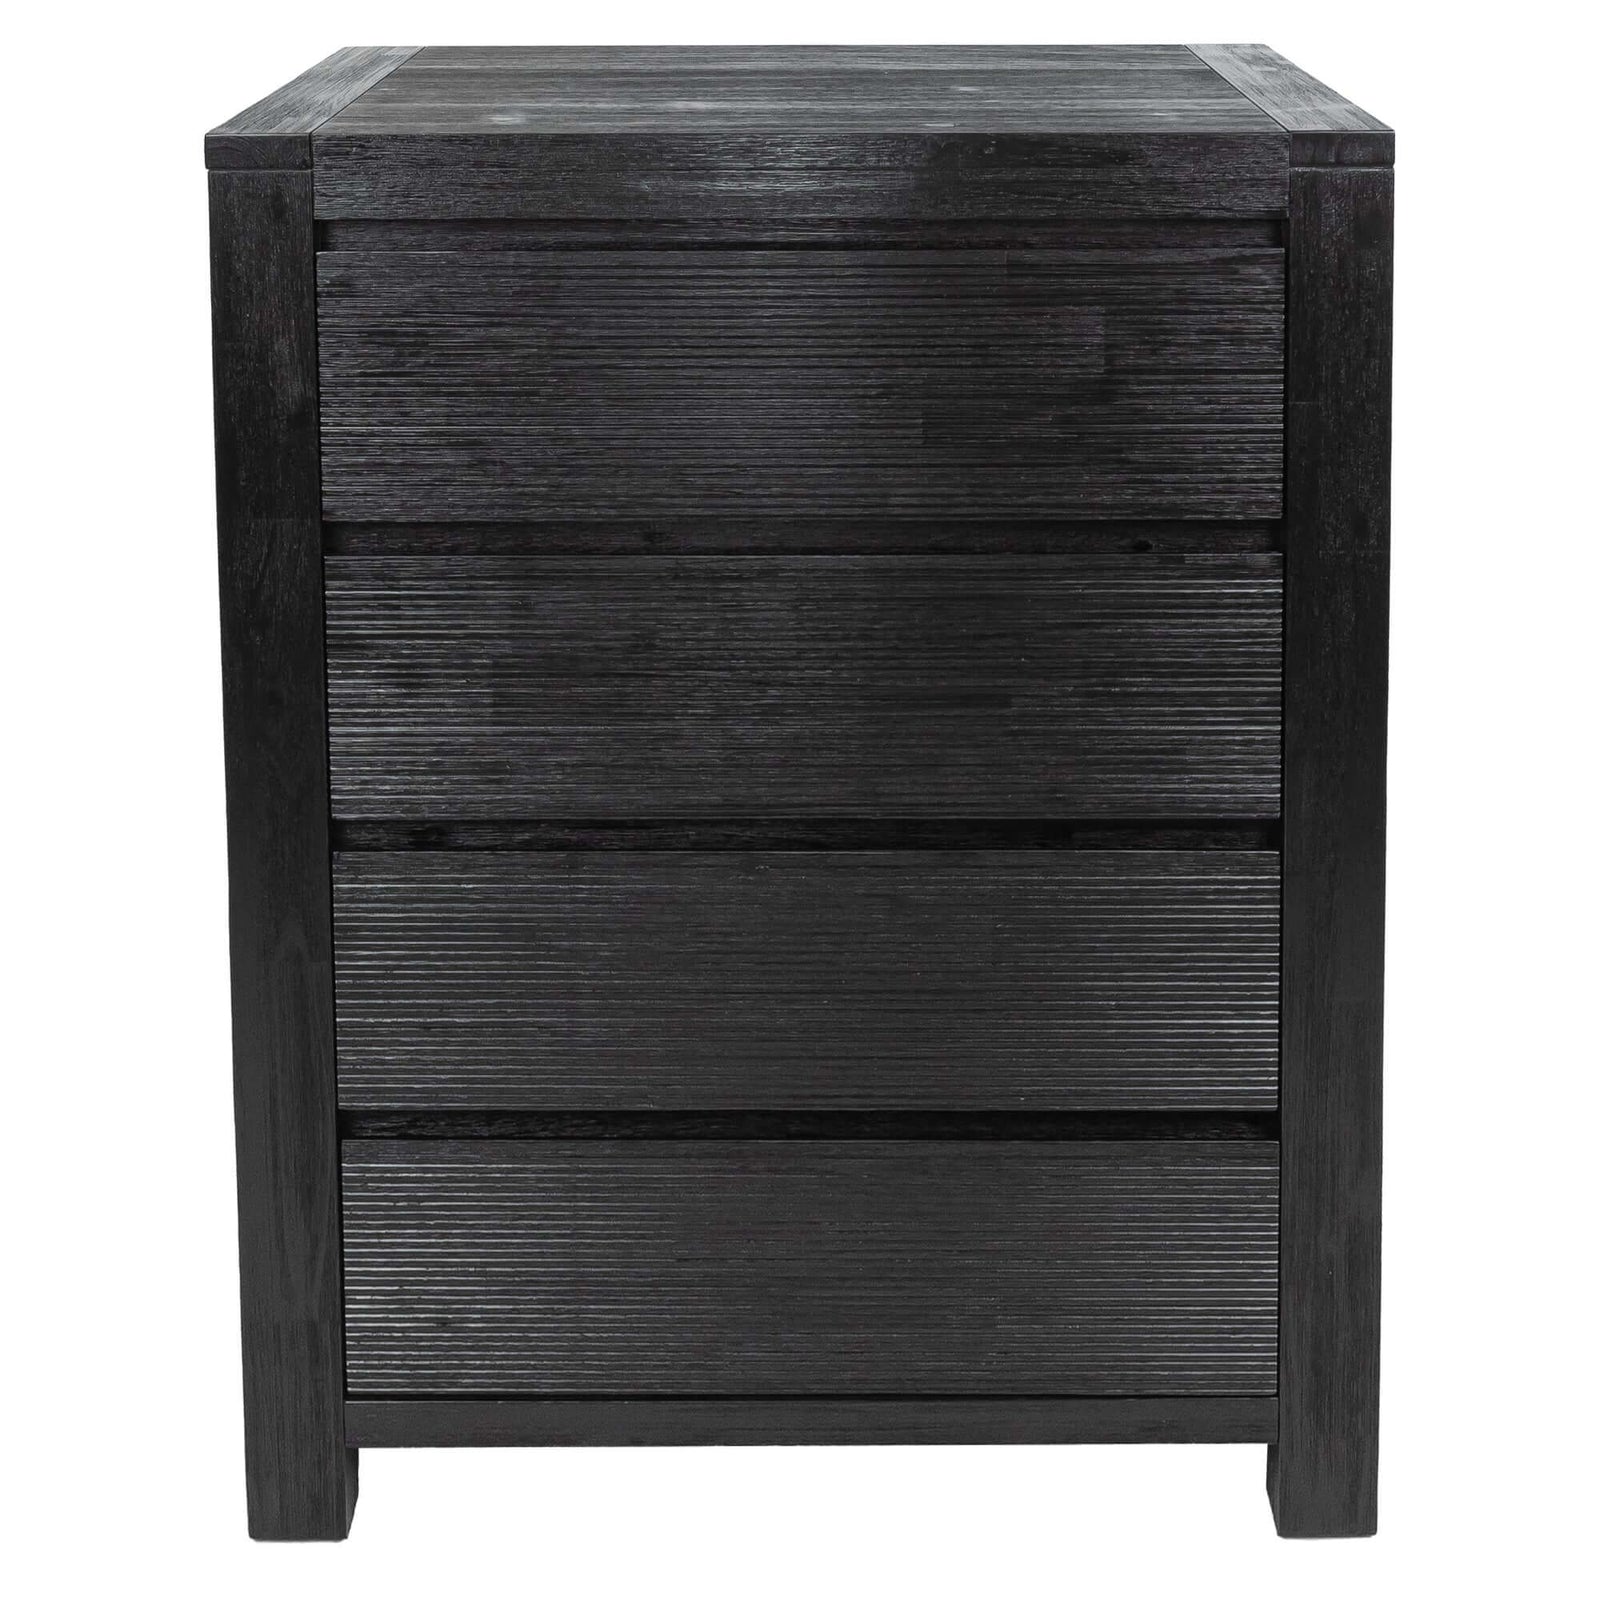 Tofino Tallboy 4 Chest of Drawers Solid Acacia Wood Bed Storage Cabinet - Black-Upinteriors